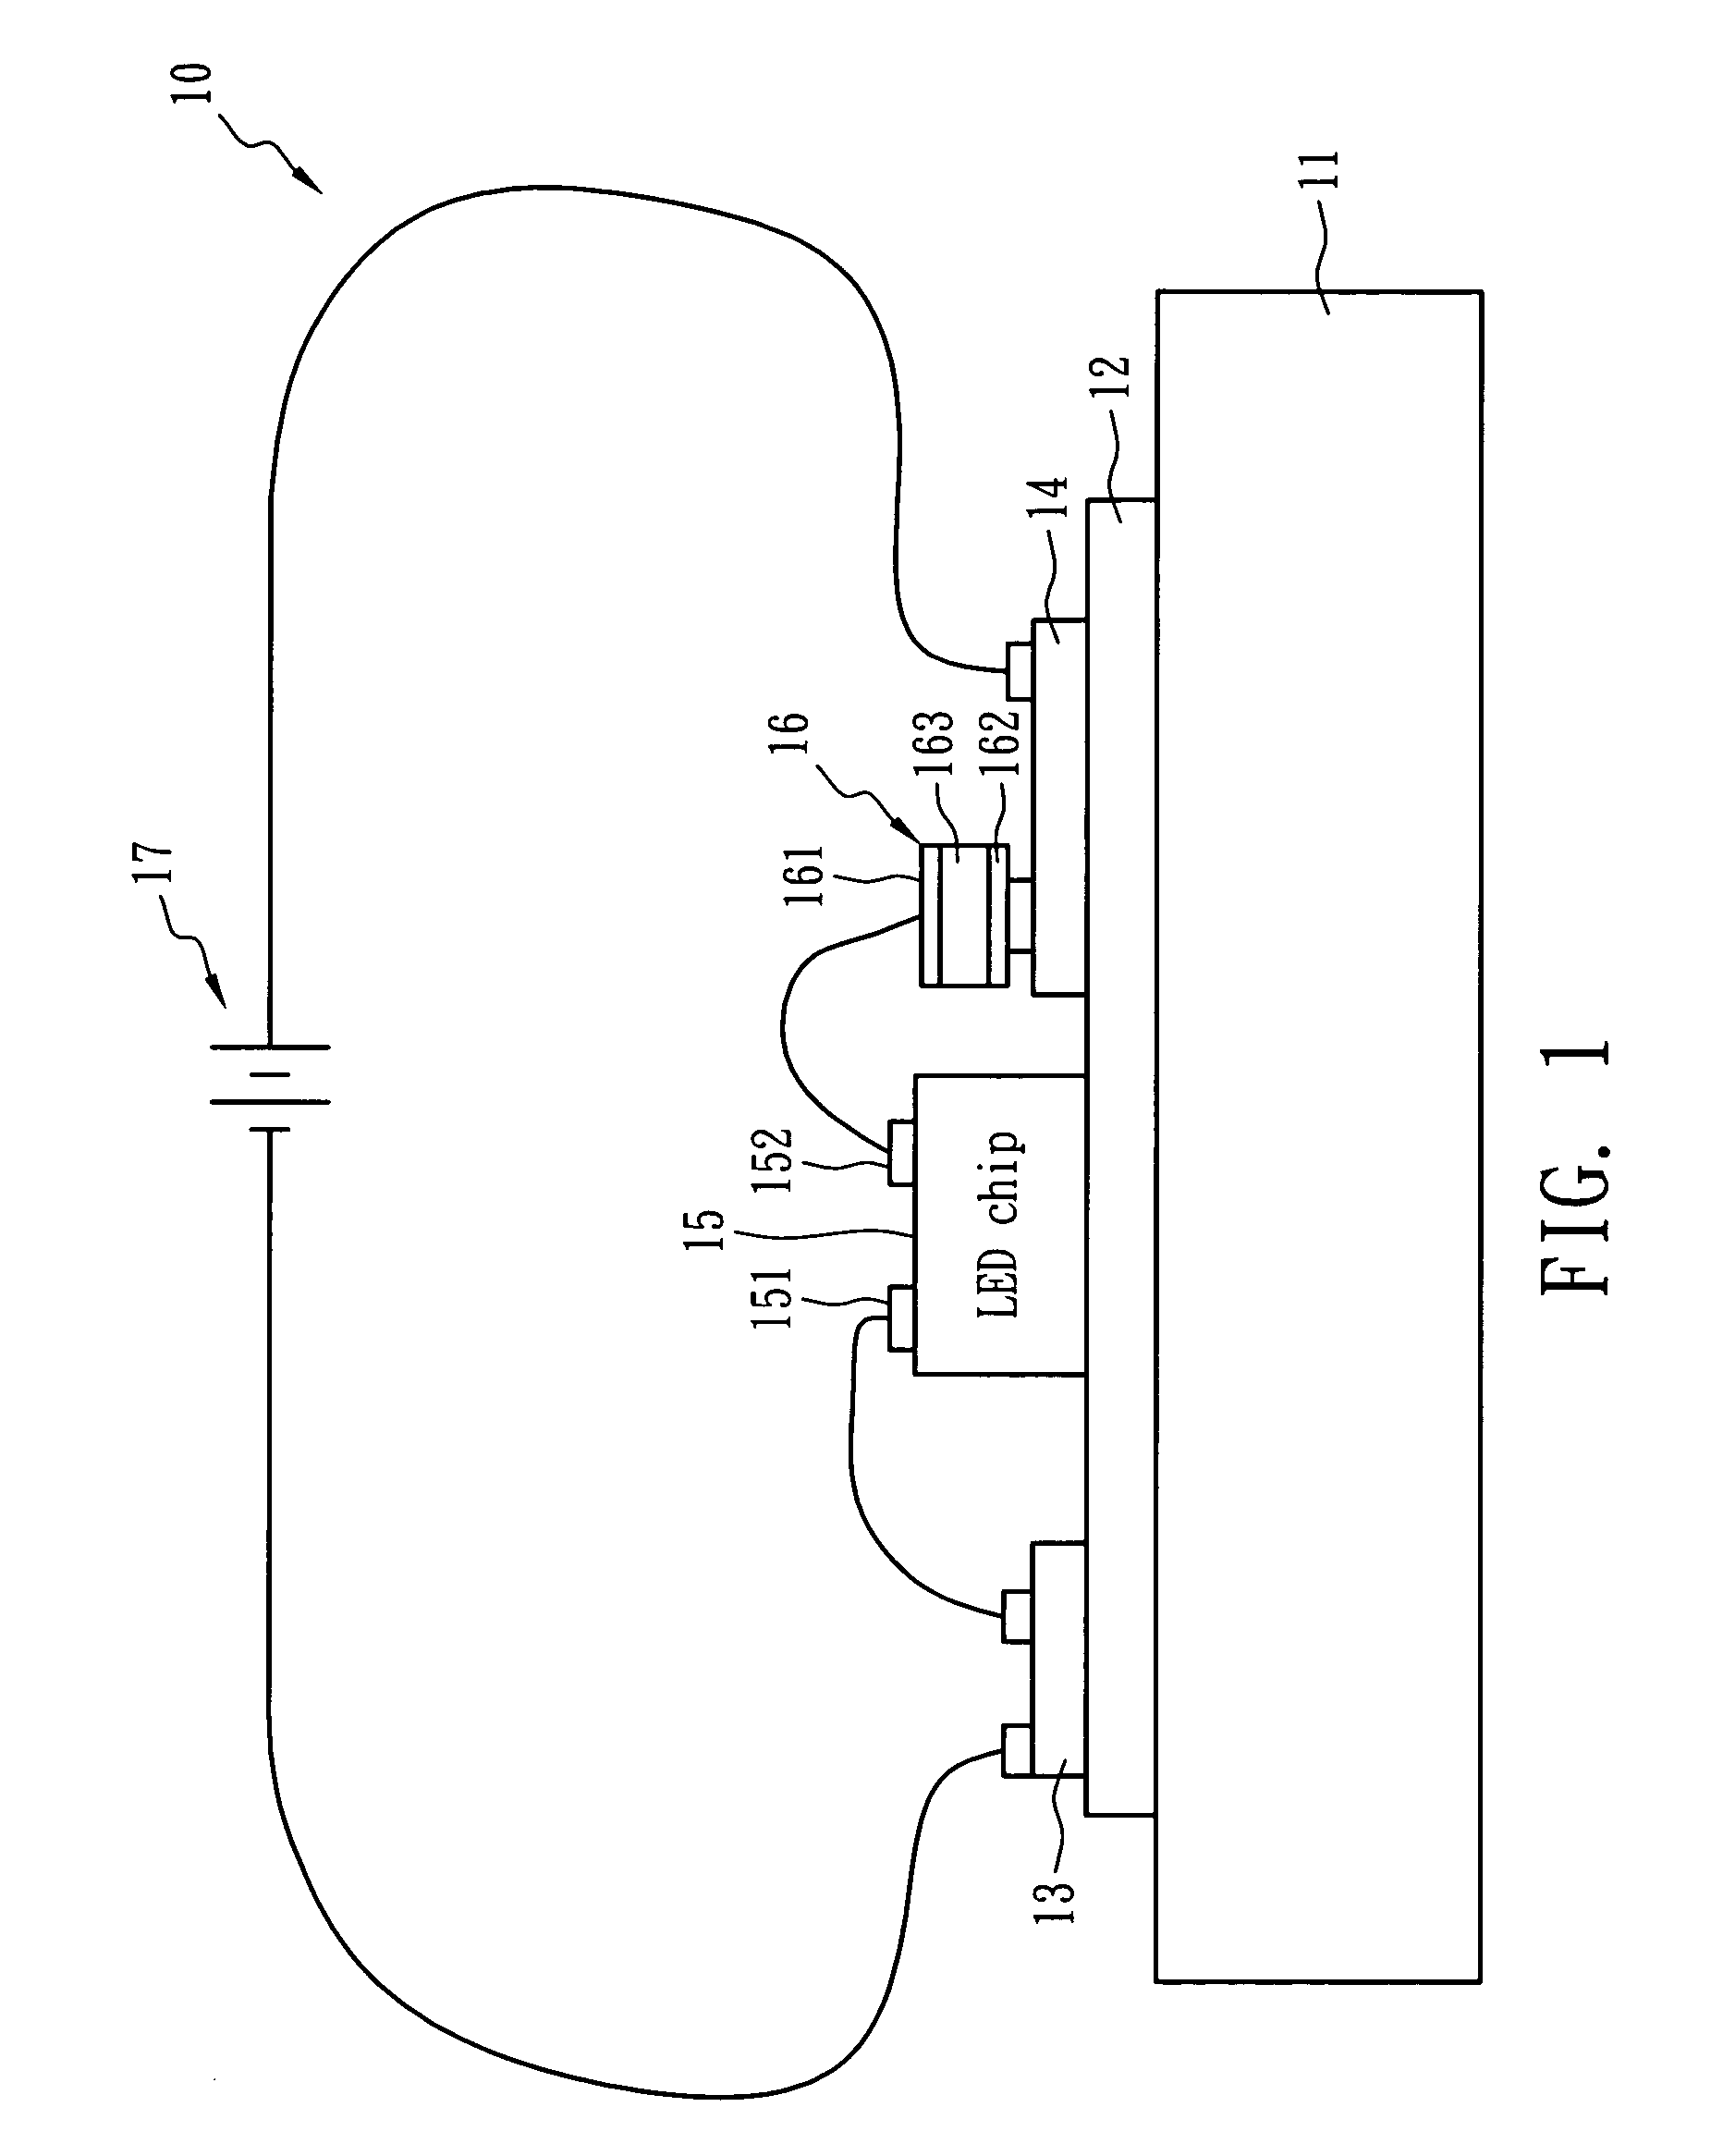 LED apparatus with temperature control function